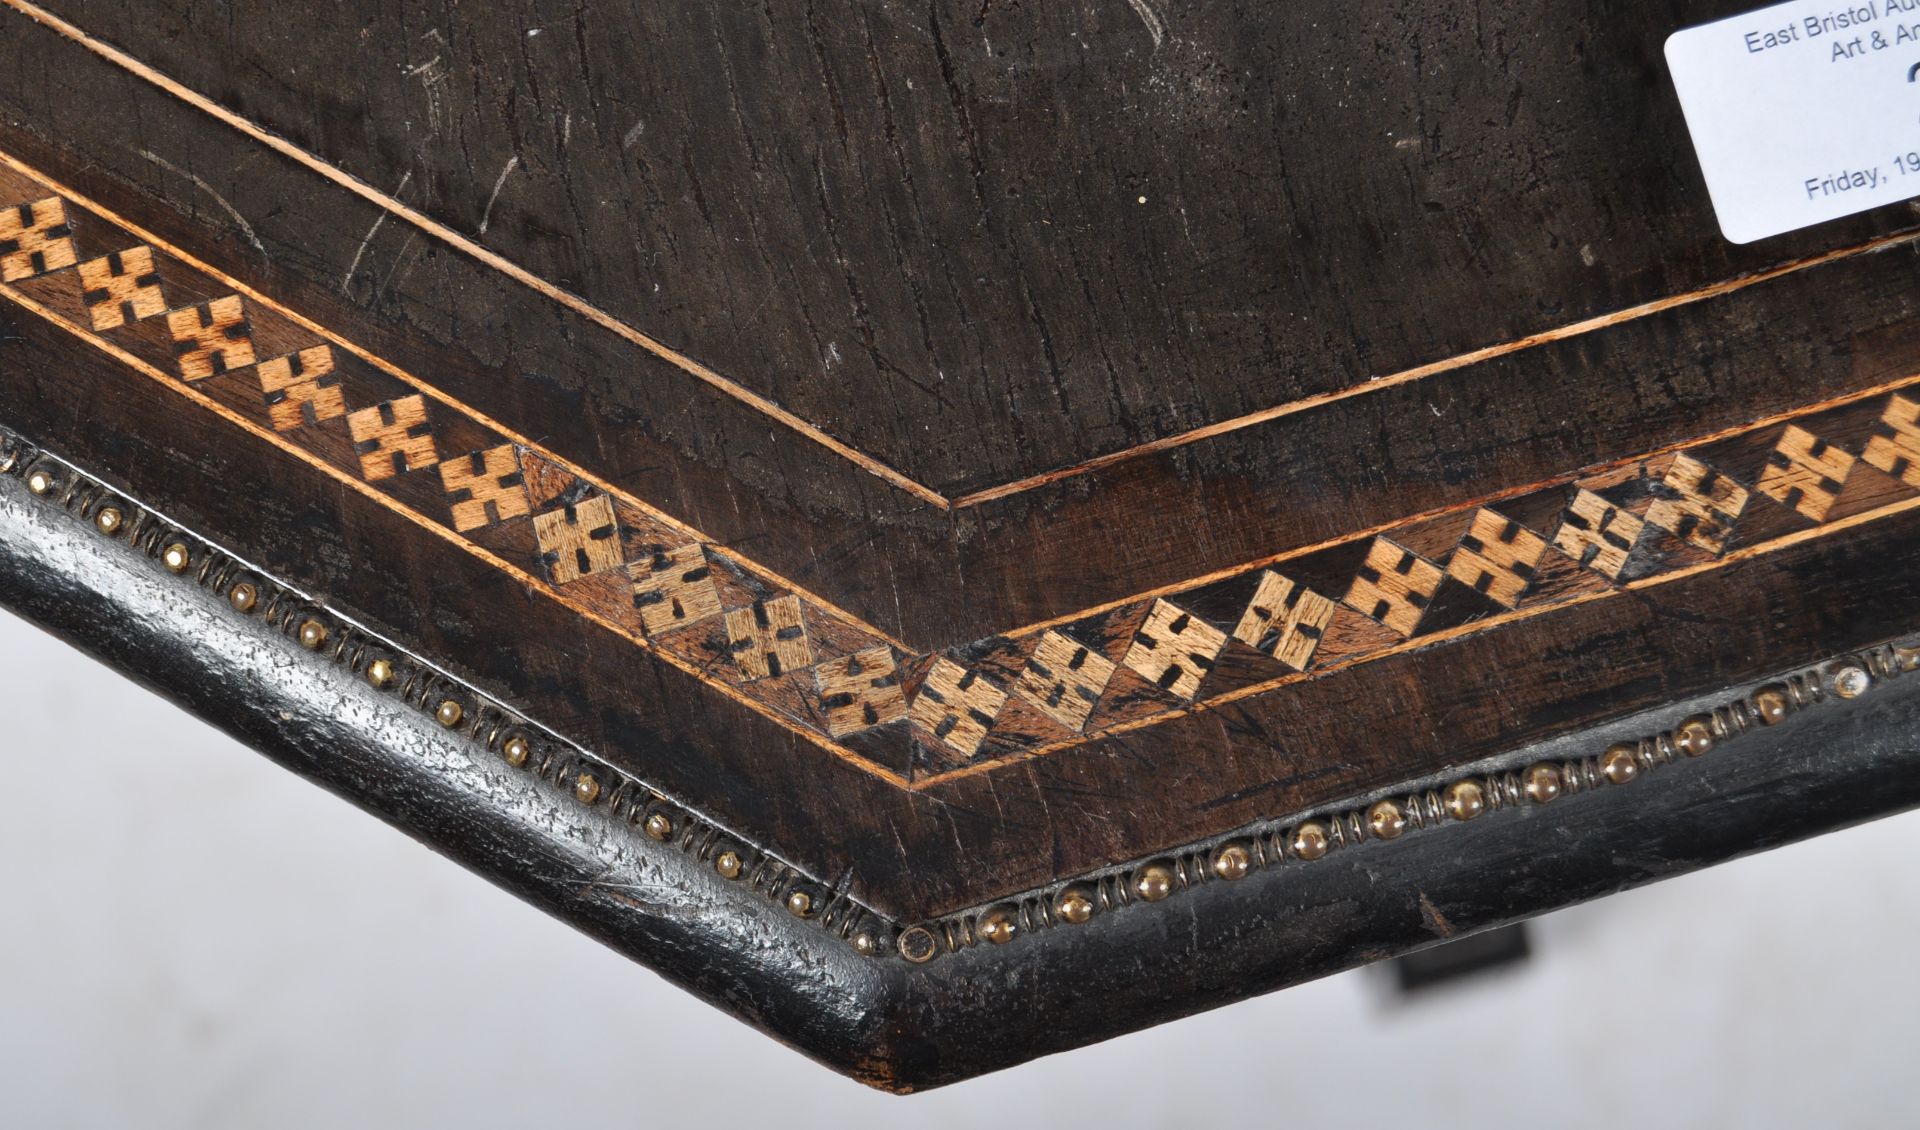 GILLOW & CO 19TH CENTURY EBONISED AND GILDED SIDE TABLE - Image 4 of 8